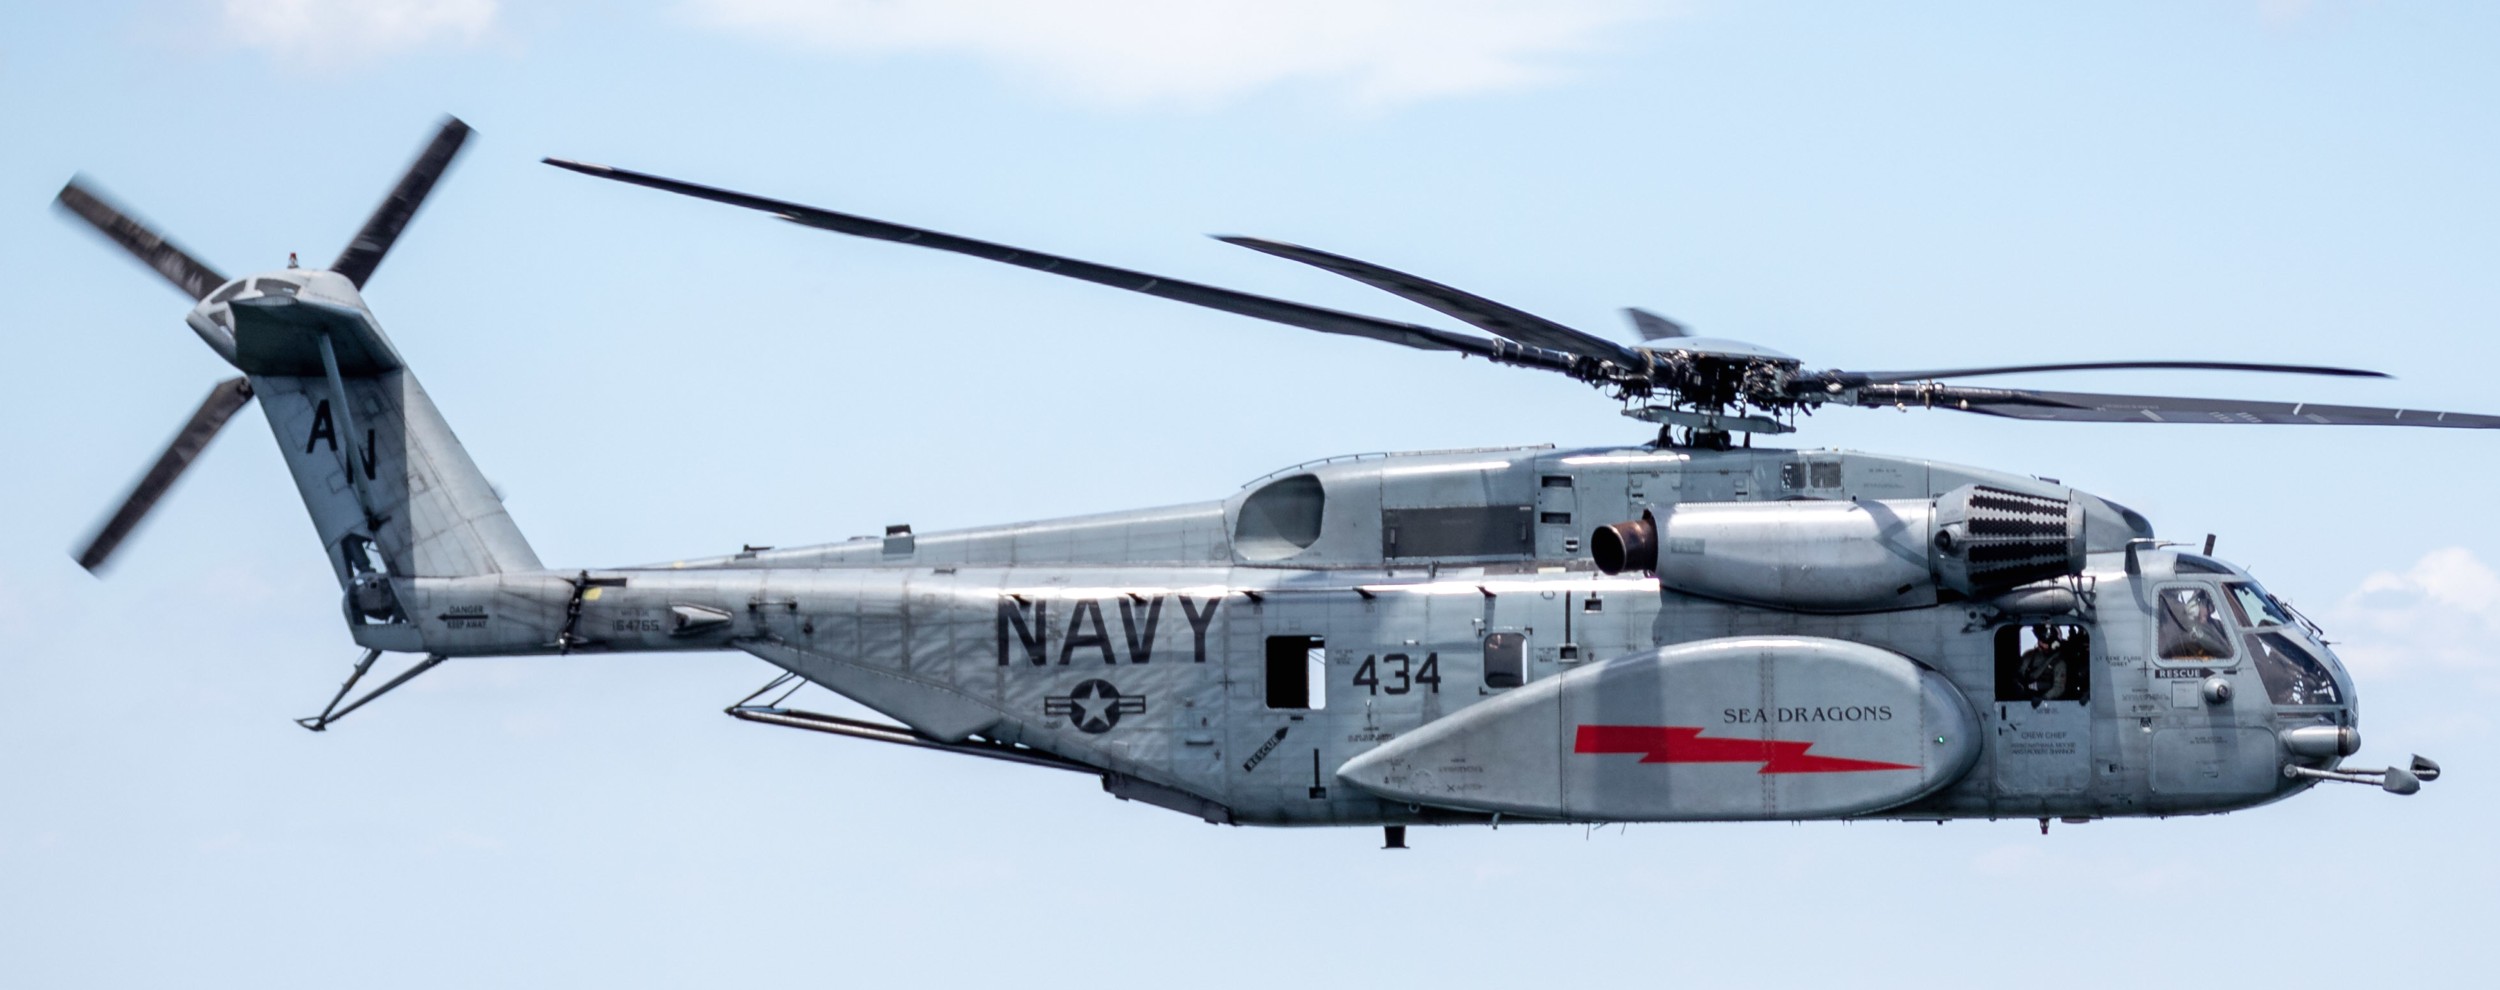 hm-12 sea dragons helicopter mine countermeasures squadron navy mh-53d 35